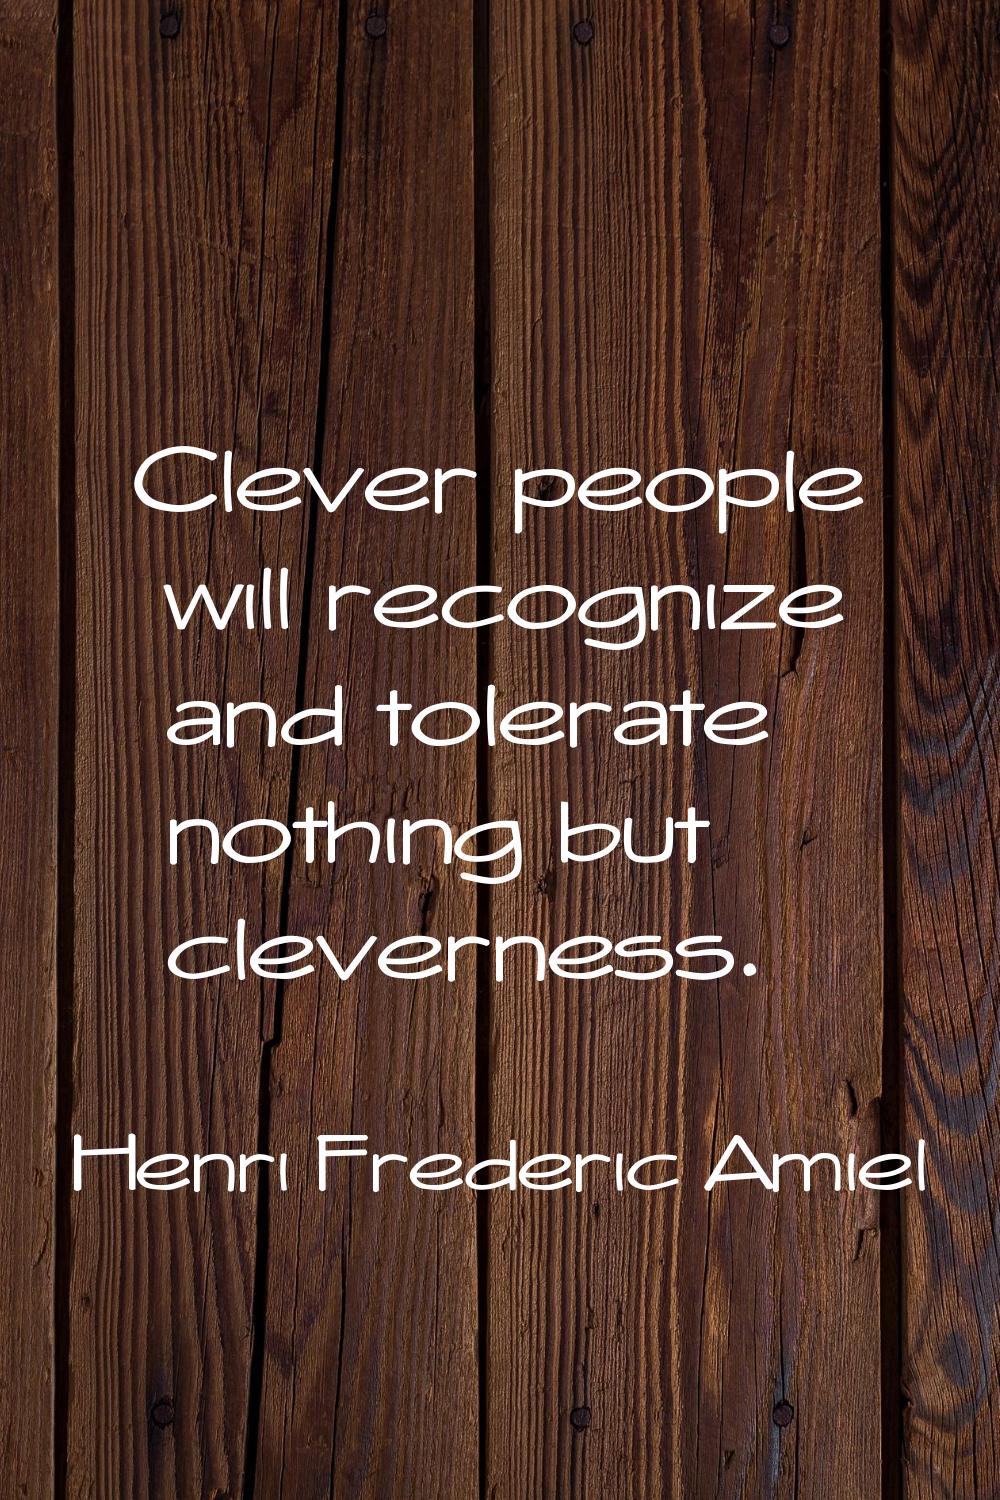 Clever people will recognize and tolerate nothing but cleverness.